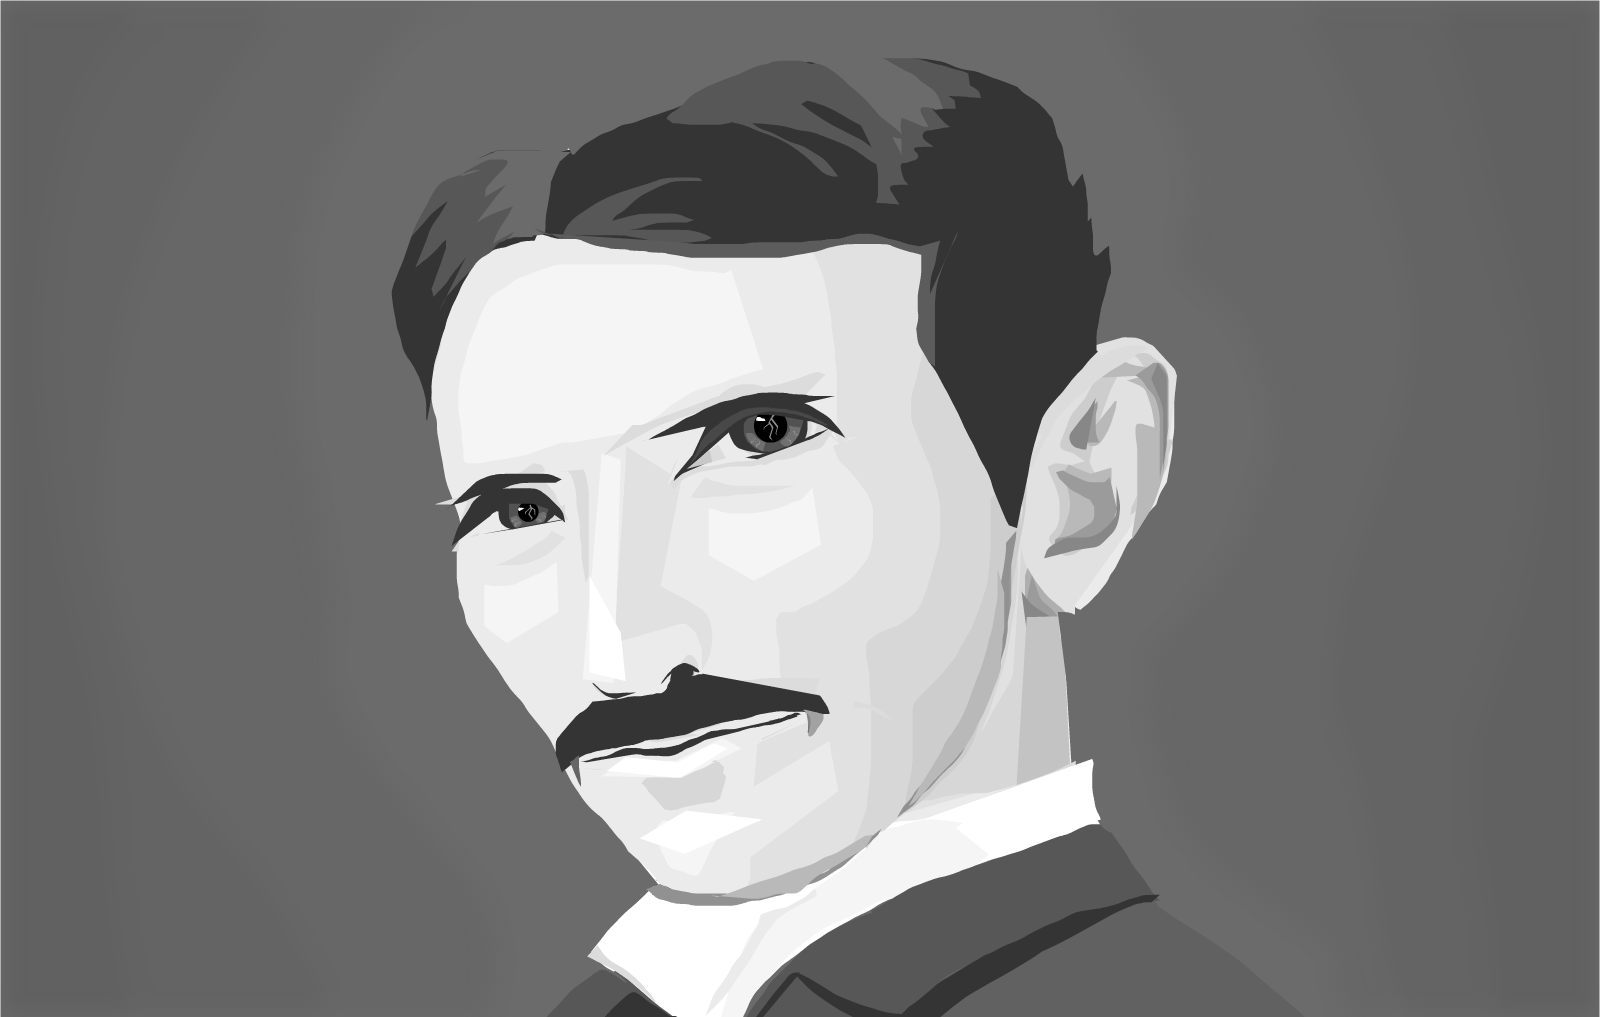 10 lessons we can learn from quotes by Nikola Tesla